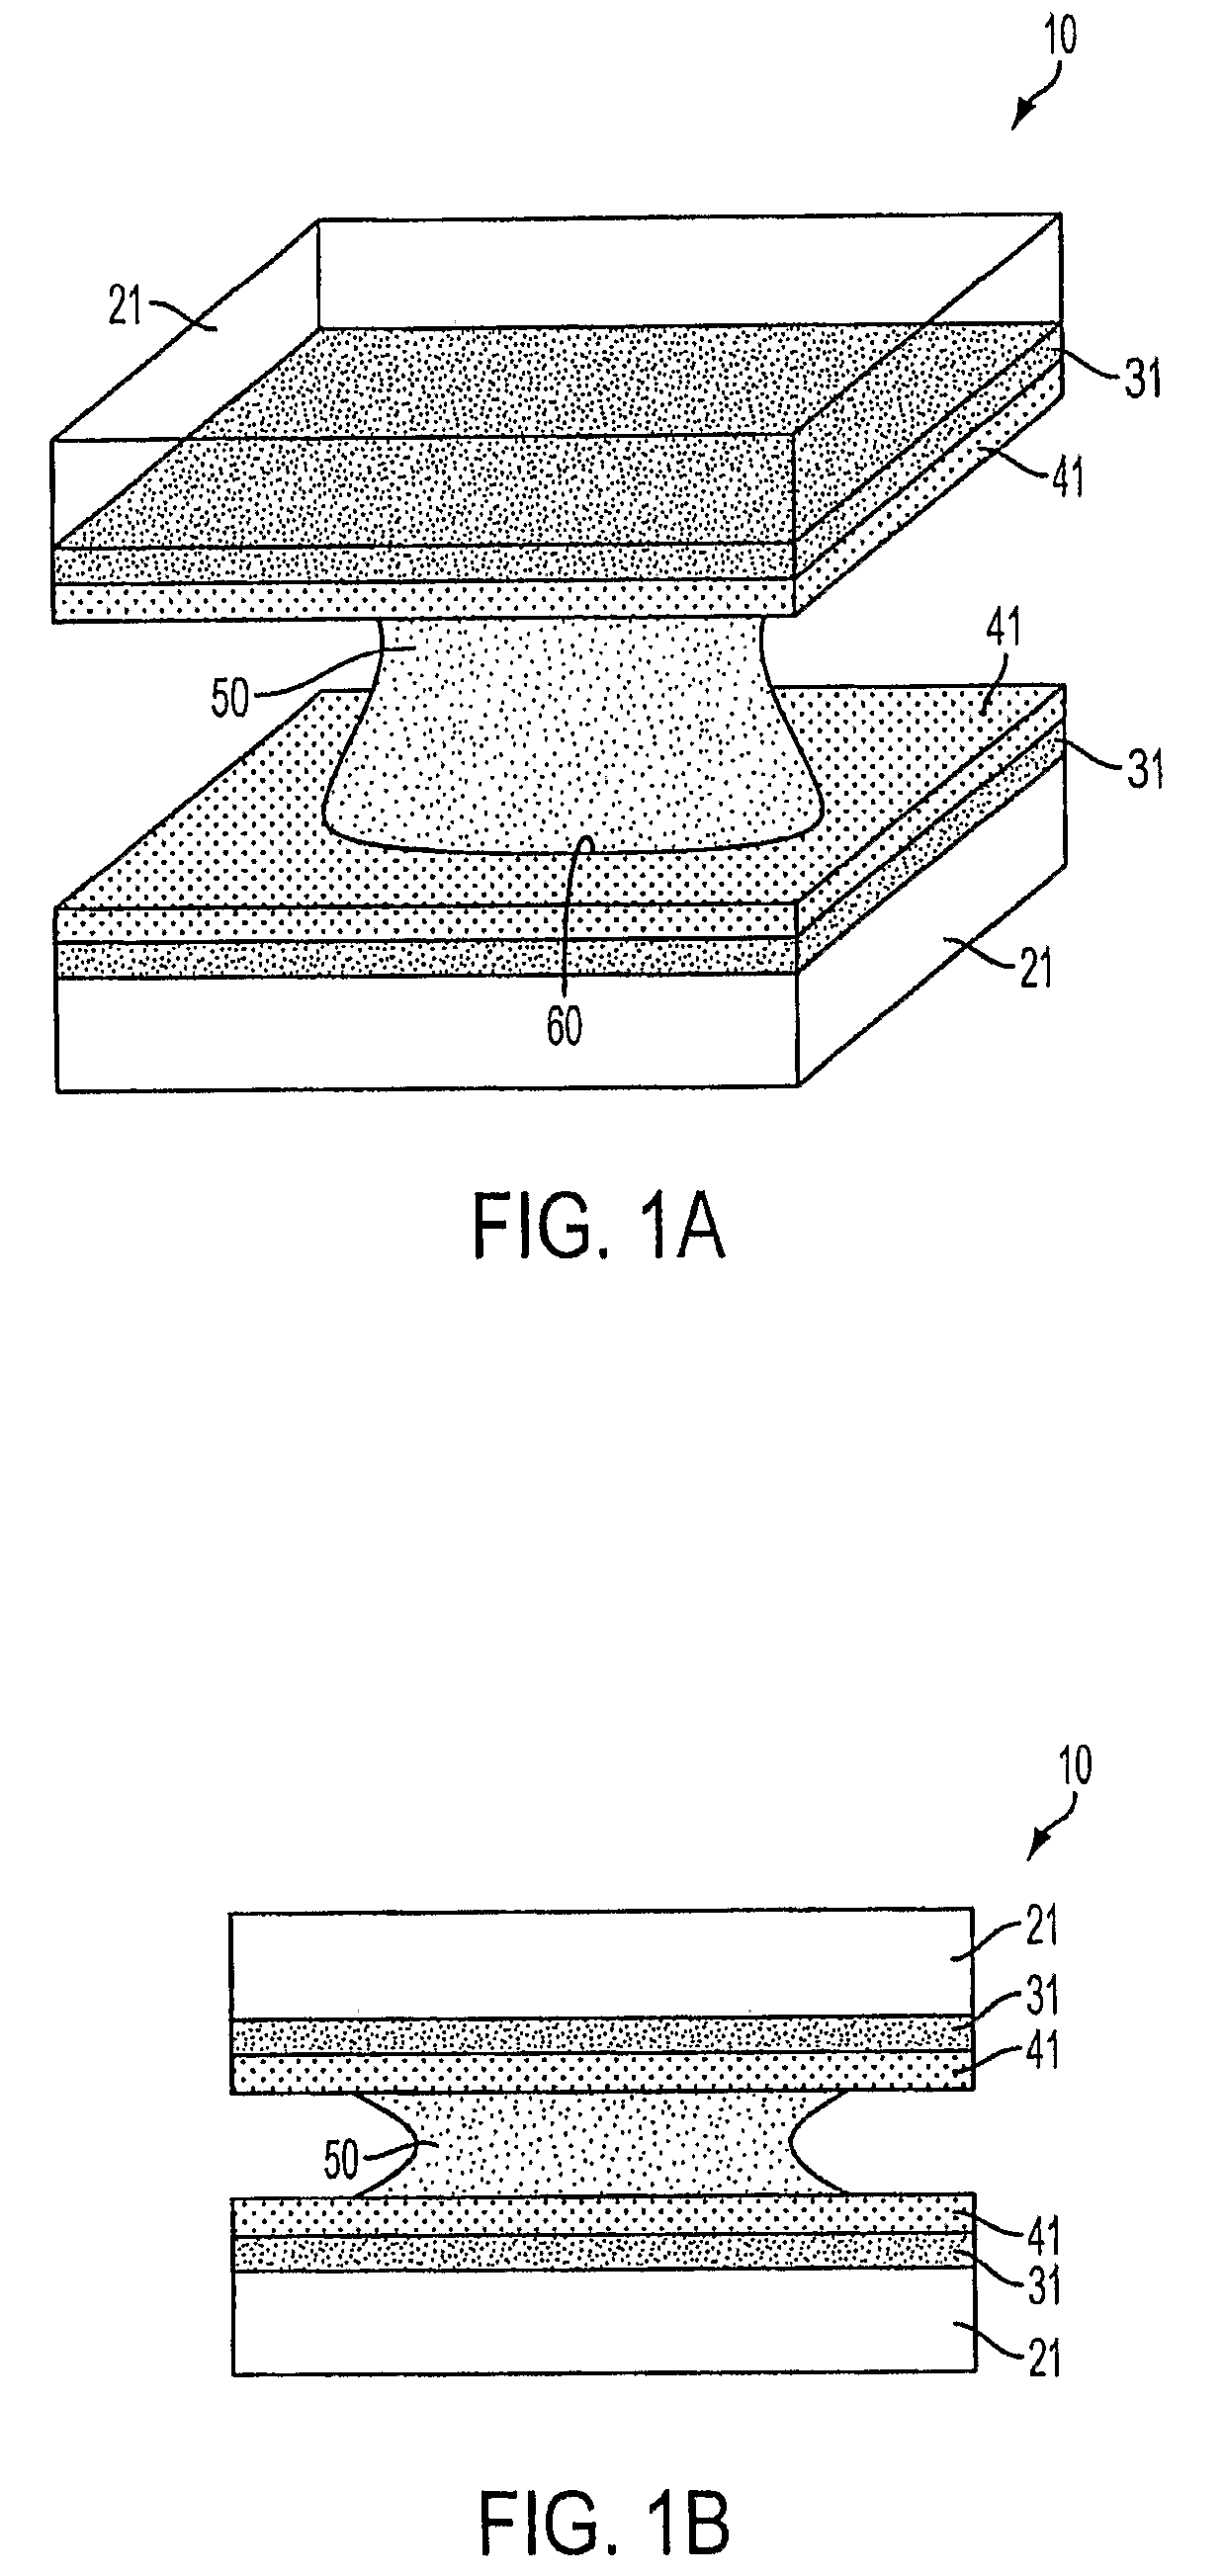 Capillary force actuator device and related method of applications